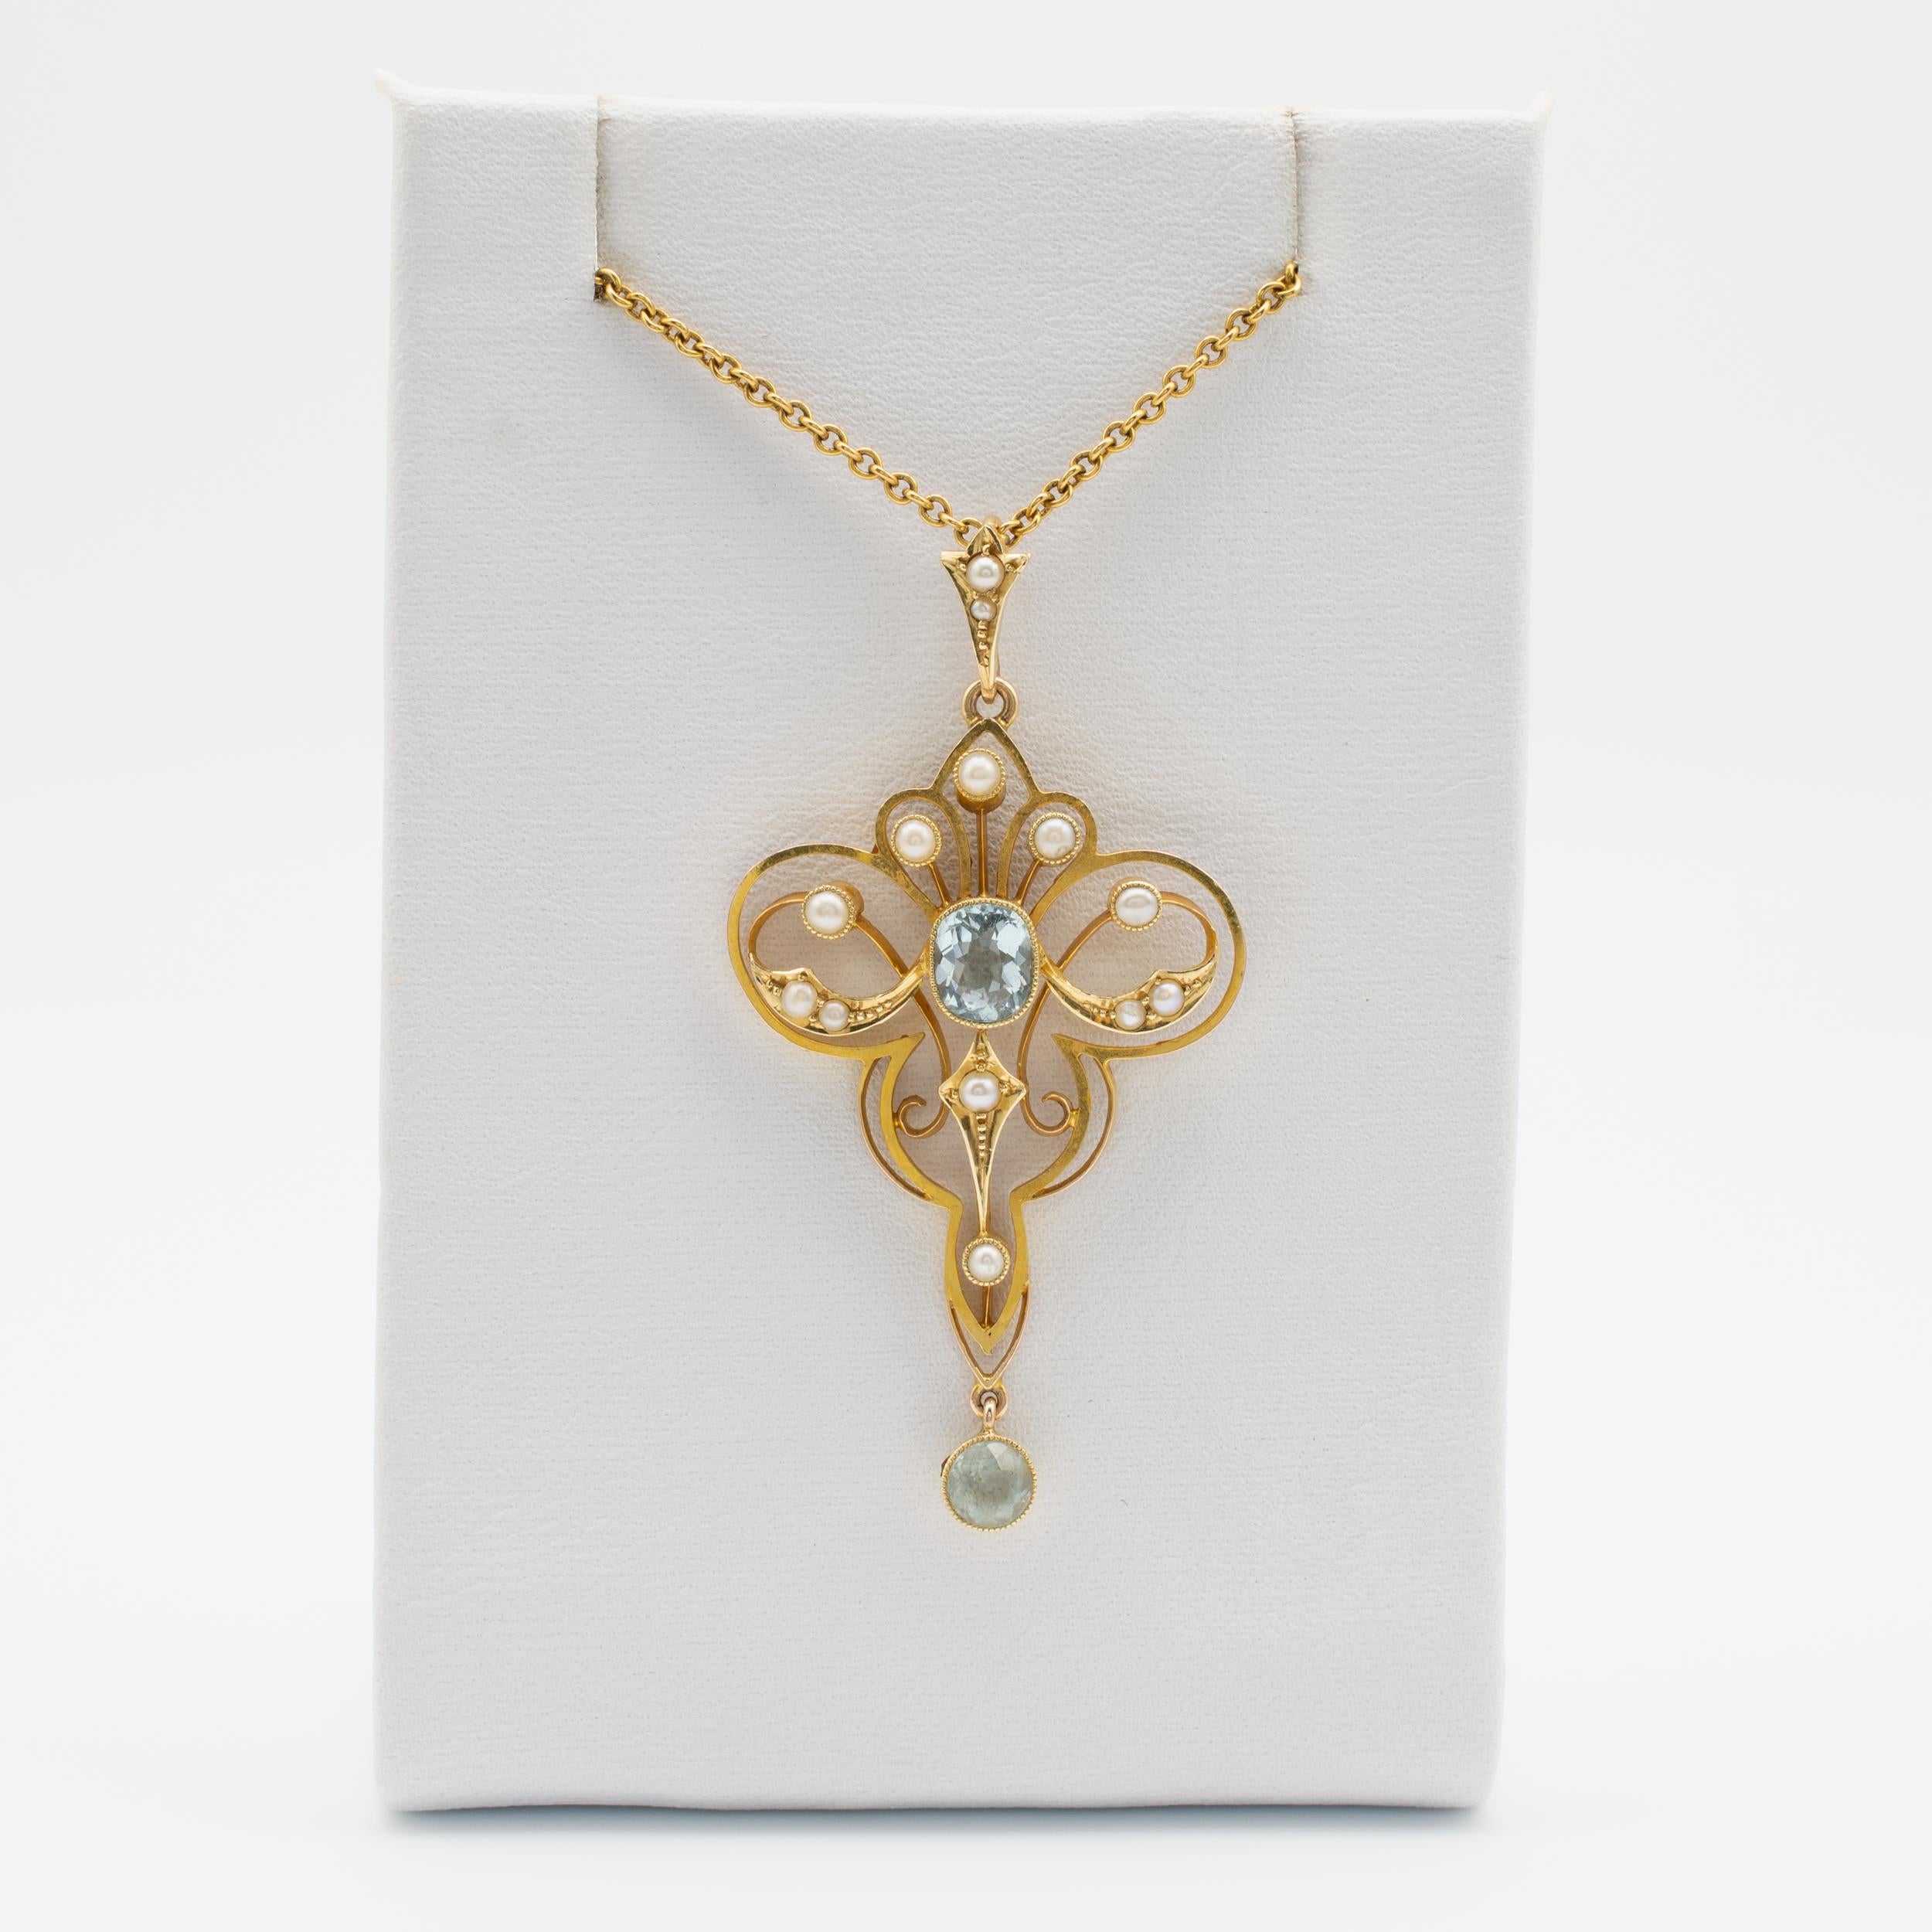 This exquisite Art Nouveau lavaliere pendant with aquamarines and seed pearls is crafted in 15 karat yellow gold and comes complete with 15-inch gold chain.

The delicate 15k gold trefoil shaped frame with scrolls is set to the center with a 0.70ct